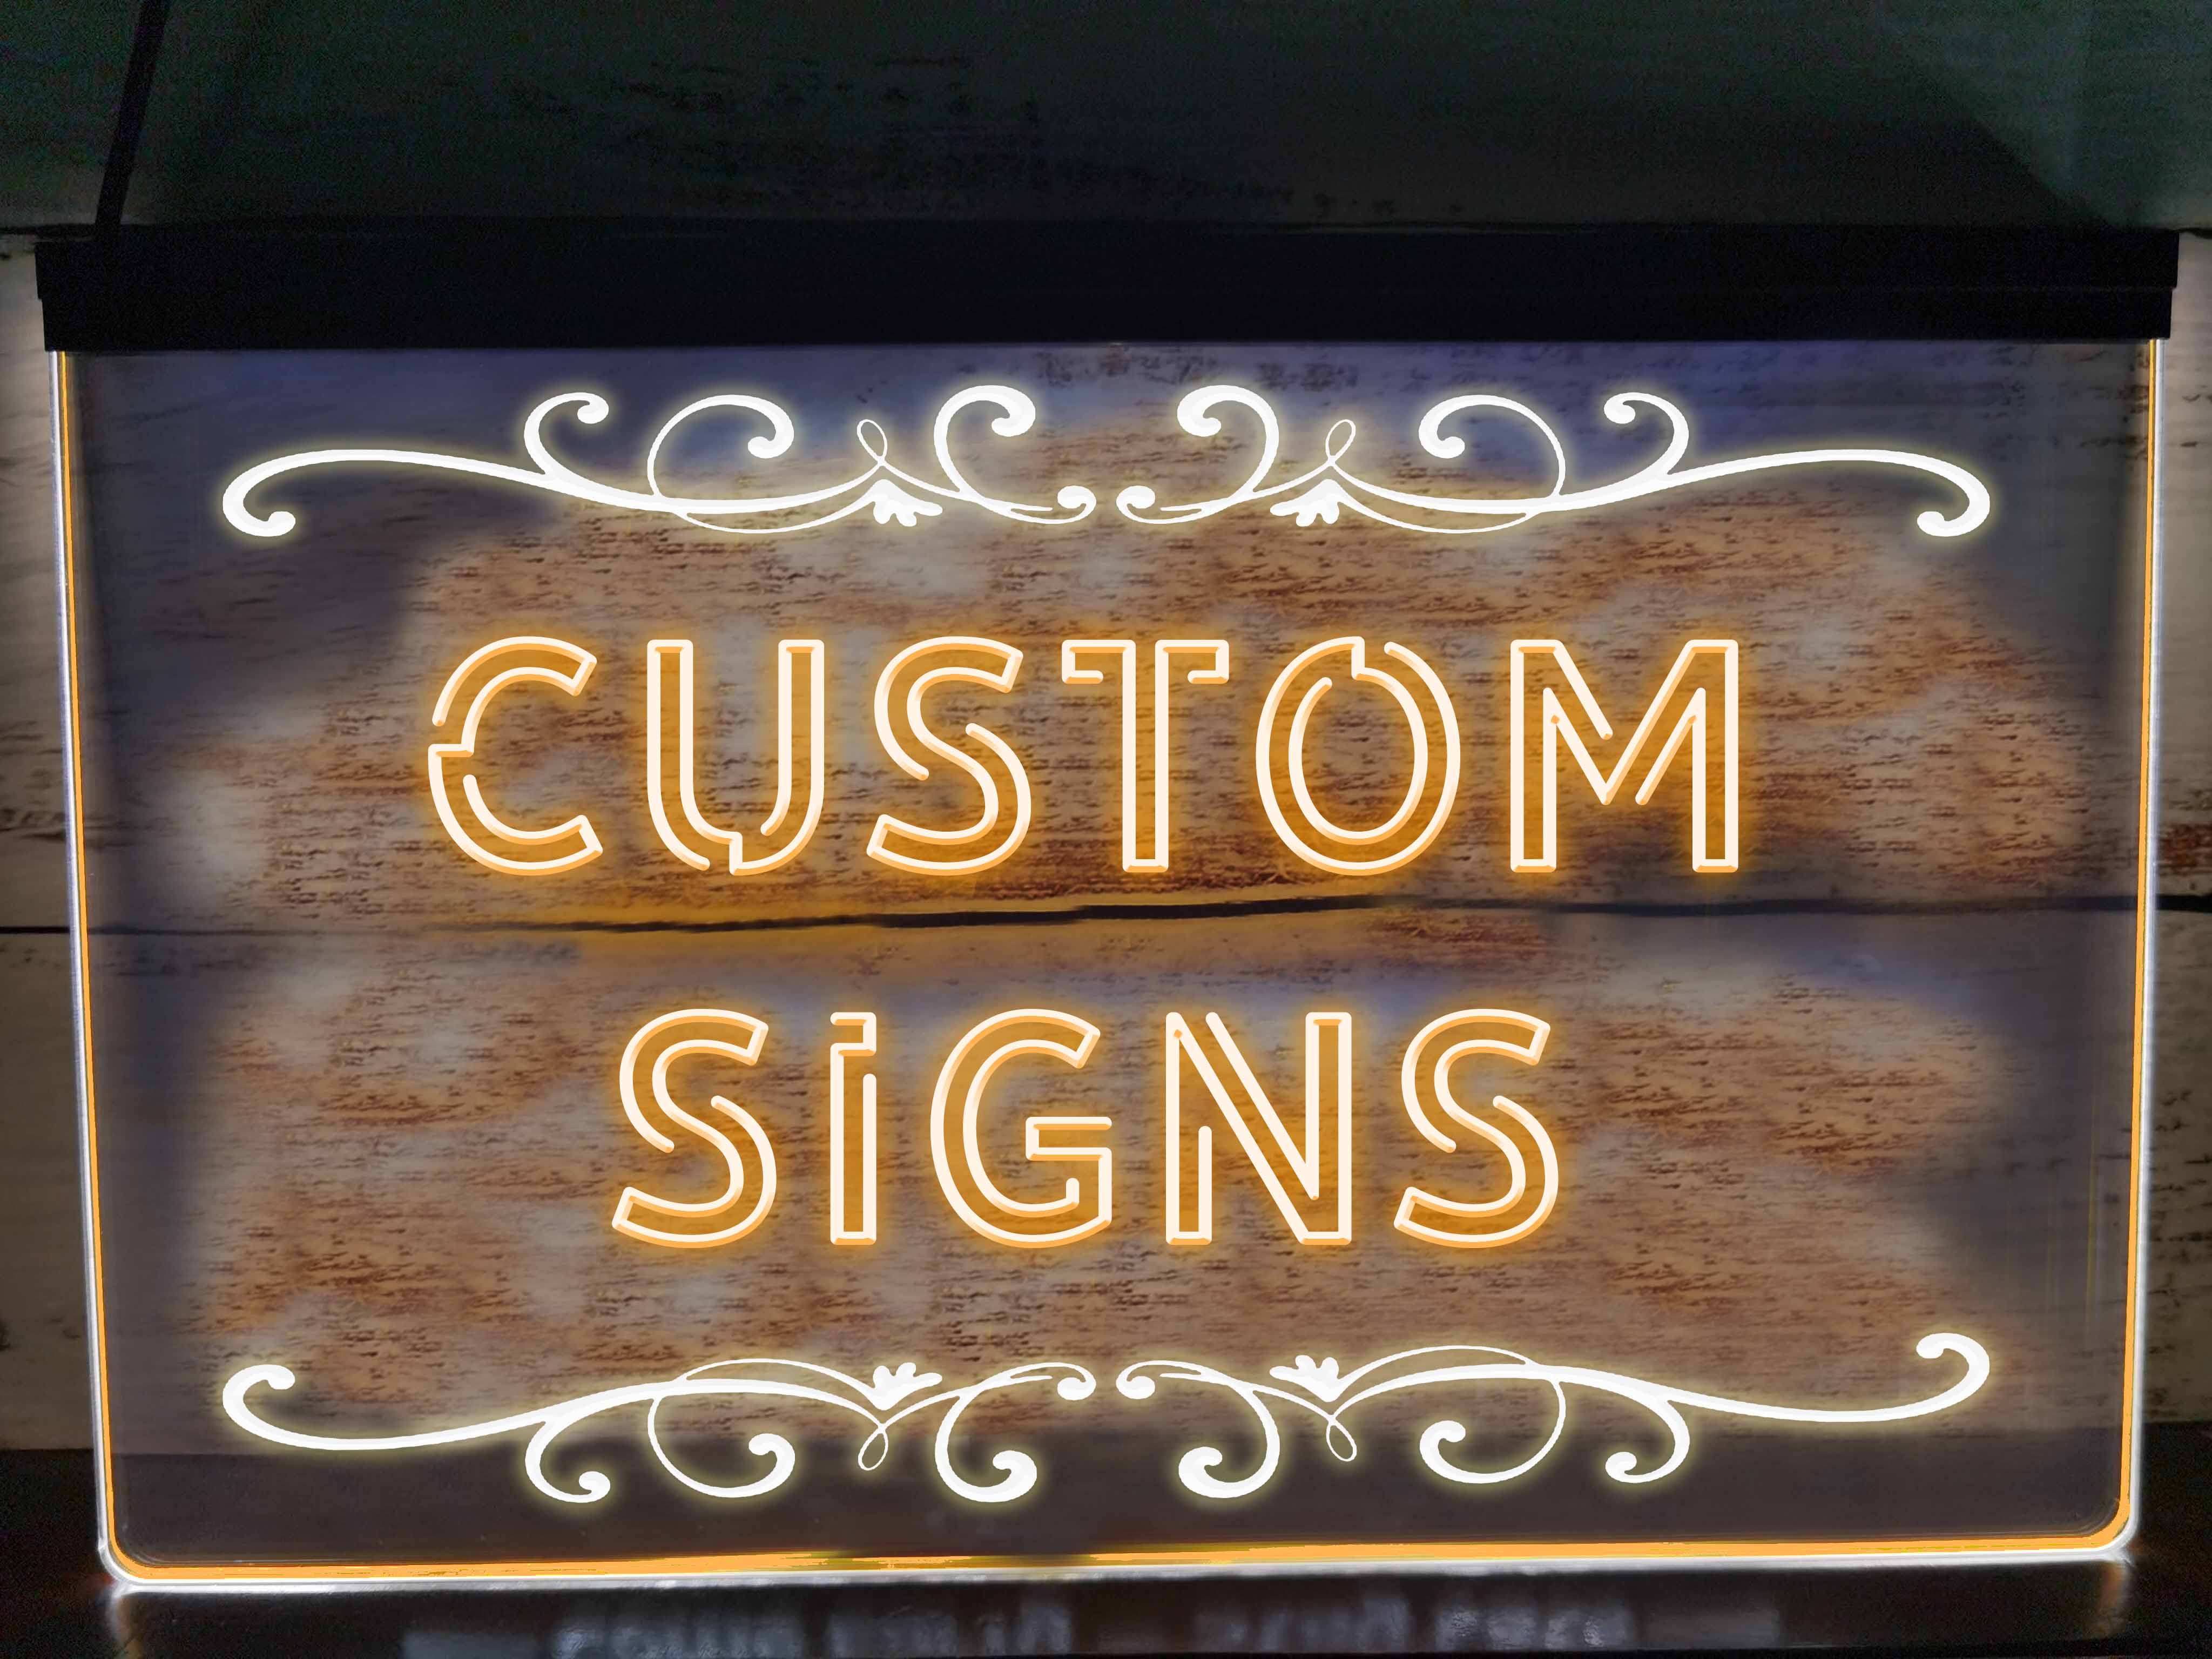 Custom Neon Sign Light - Illuminate Your Ideas with Personalized